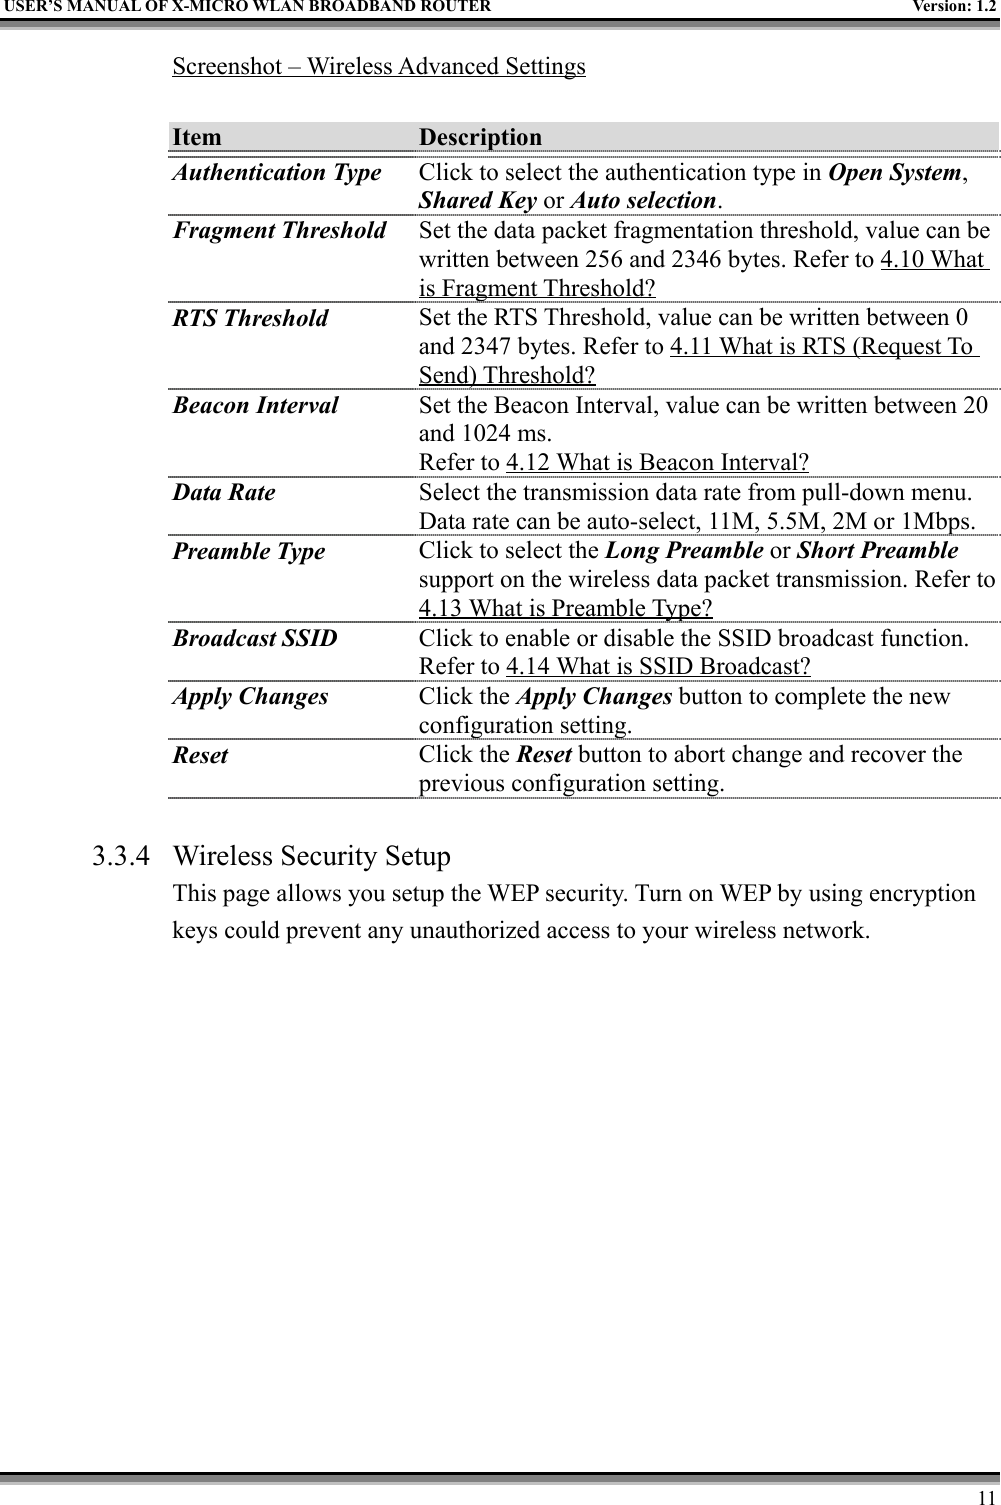 USER’S MANUAL OF X-MICRO WLAN BROADBAND ROUTER Version: 1.211Screenshot – Wireless Advanced SettingsItem DescriptionAuthentication Type Click to select the authentication type in Open System,Shared Key or Auto selection.Fragment Threshold Set the data packet fragmentation threshold, value can bewritten between 256 and 2346 bytes. Refer to 4.10 Whatis Fragment Threshold?RTS Threshold Set the RTS Threshold, value can be written between 0and 2347 bytes. Refer to 4.11 What is RTS (Request ToSend) Threshold?Beacon Interval Set the Beacon Interval, value can be written between 20and 1024 ms.Refer to 4.12 What is Beacon Interval?Data Rate Select the transmission data rate from pull-down menu.Data rate can be auto-select, 11M, 5.5M, 2M or 1Mbps.Preamble Type Click to select the Long Preamble or Short Preamblesupport on the wireless data packet transmission. Refer to4.13 What is Preamble Type?Broadcast SSID Click to enable or disable the SSID broadcast function.Refer to 4.14 What is SSID Broadcast?Apply Changes Click the Apply Changes button to complete the newconfiguration setting.Reset Click the Reset button to abort change and recover theprevious configuration setting.3.3.4 Wireless Security SetupThis page allows you setup the WEP security. Turn on WEP by using encryptionkeys could prevent any unauthorized access to your wireless network.